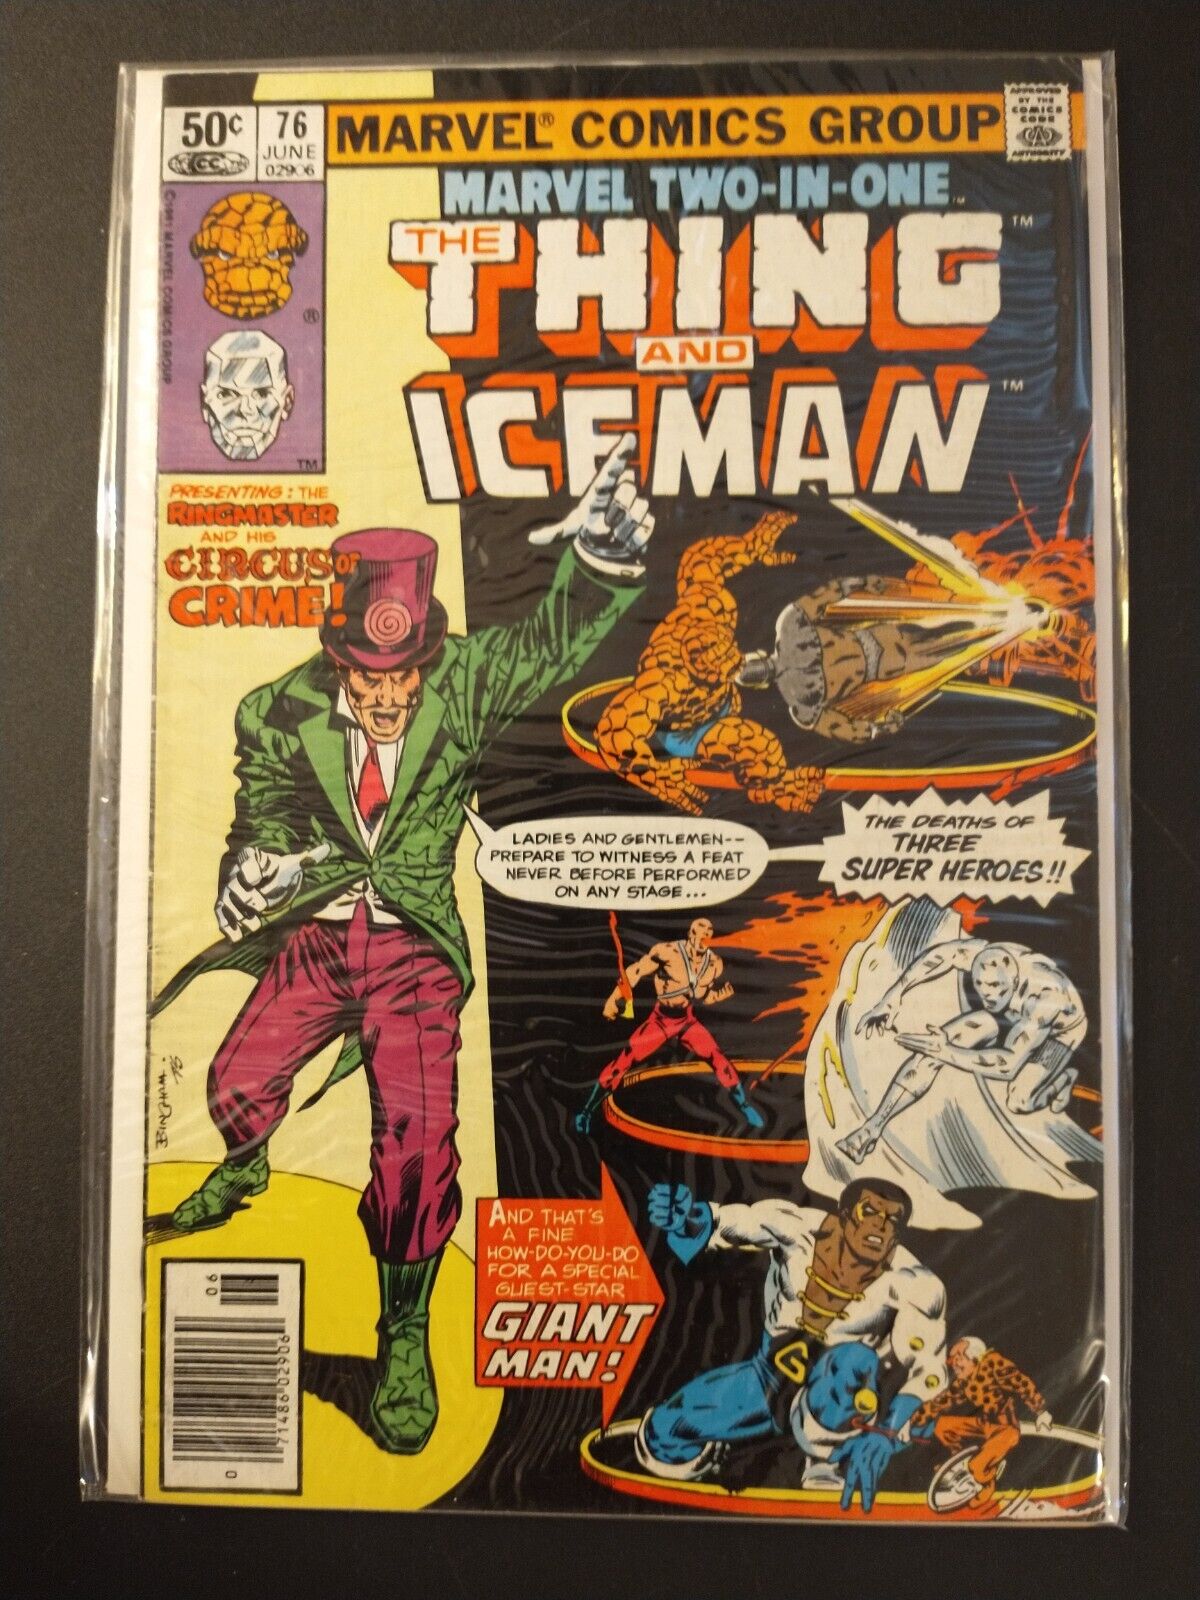 Marvel Two-In-One #76 Marvel Comics | the Thing Iceman